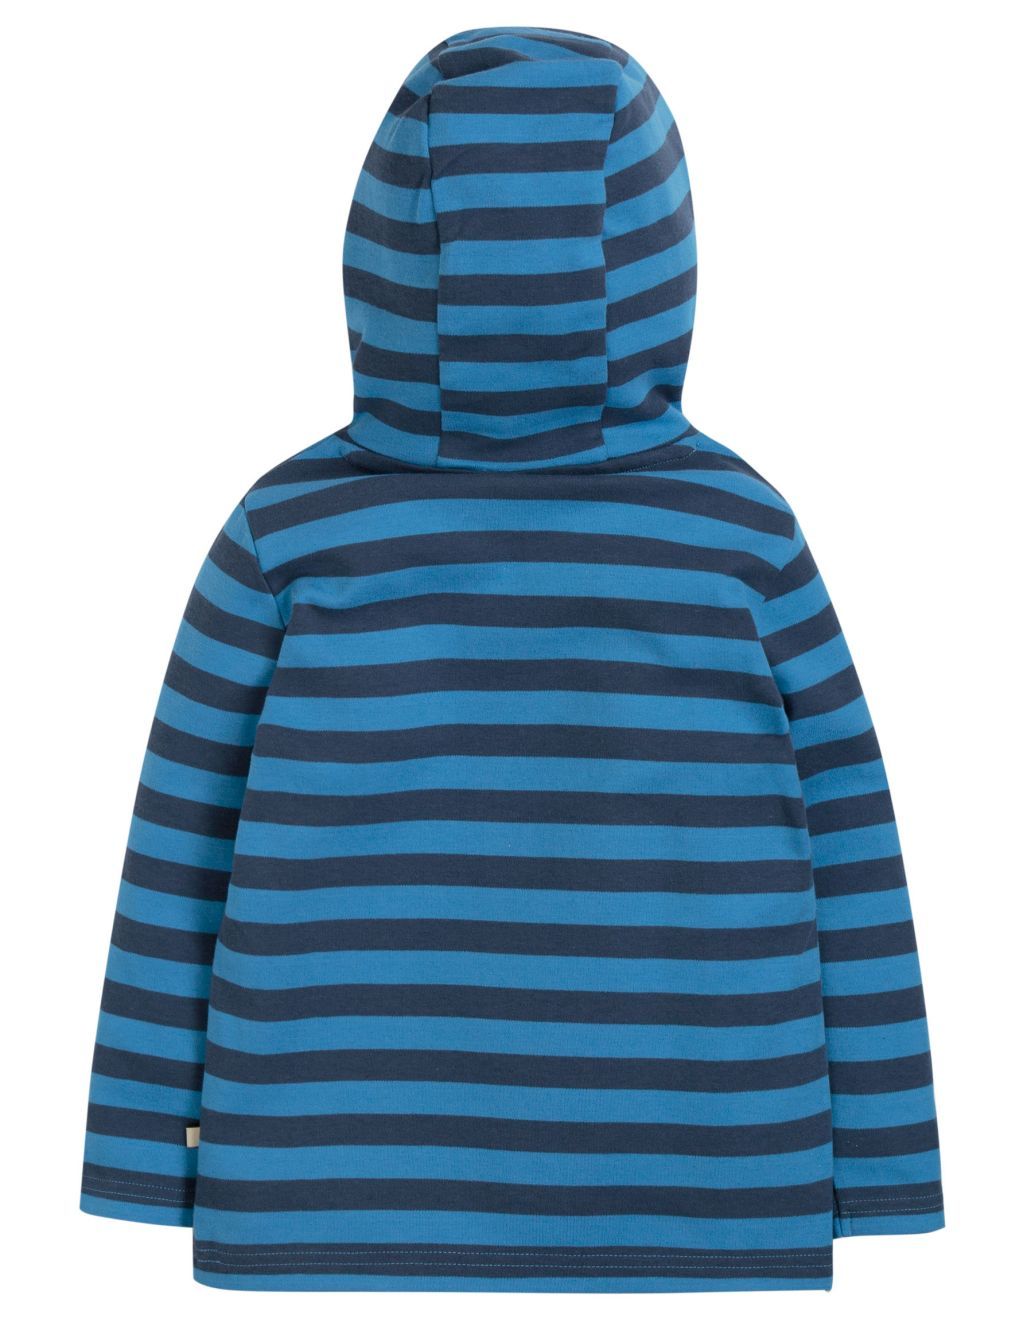 Campfire Hooded Top sail blue stripe/Angler Fish 134/140